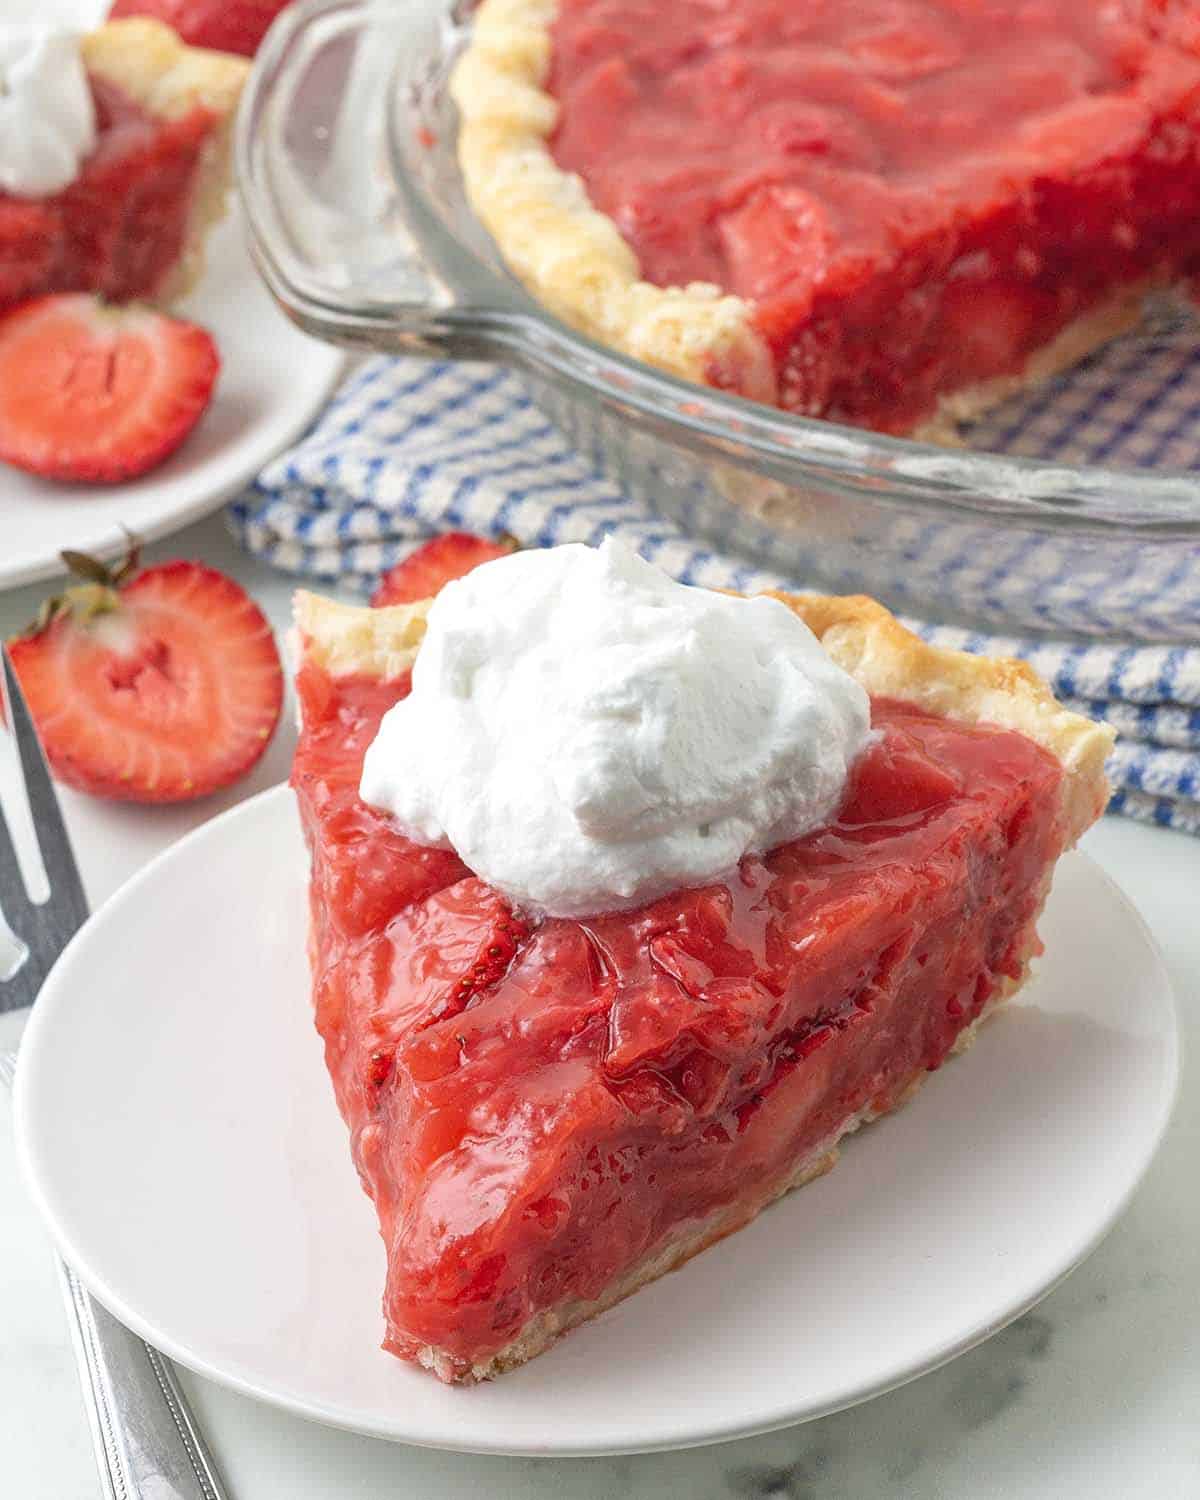 A slice of strawberry pie on a white plate, the pie is topped with whipped cream.